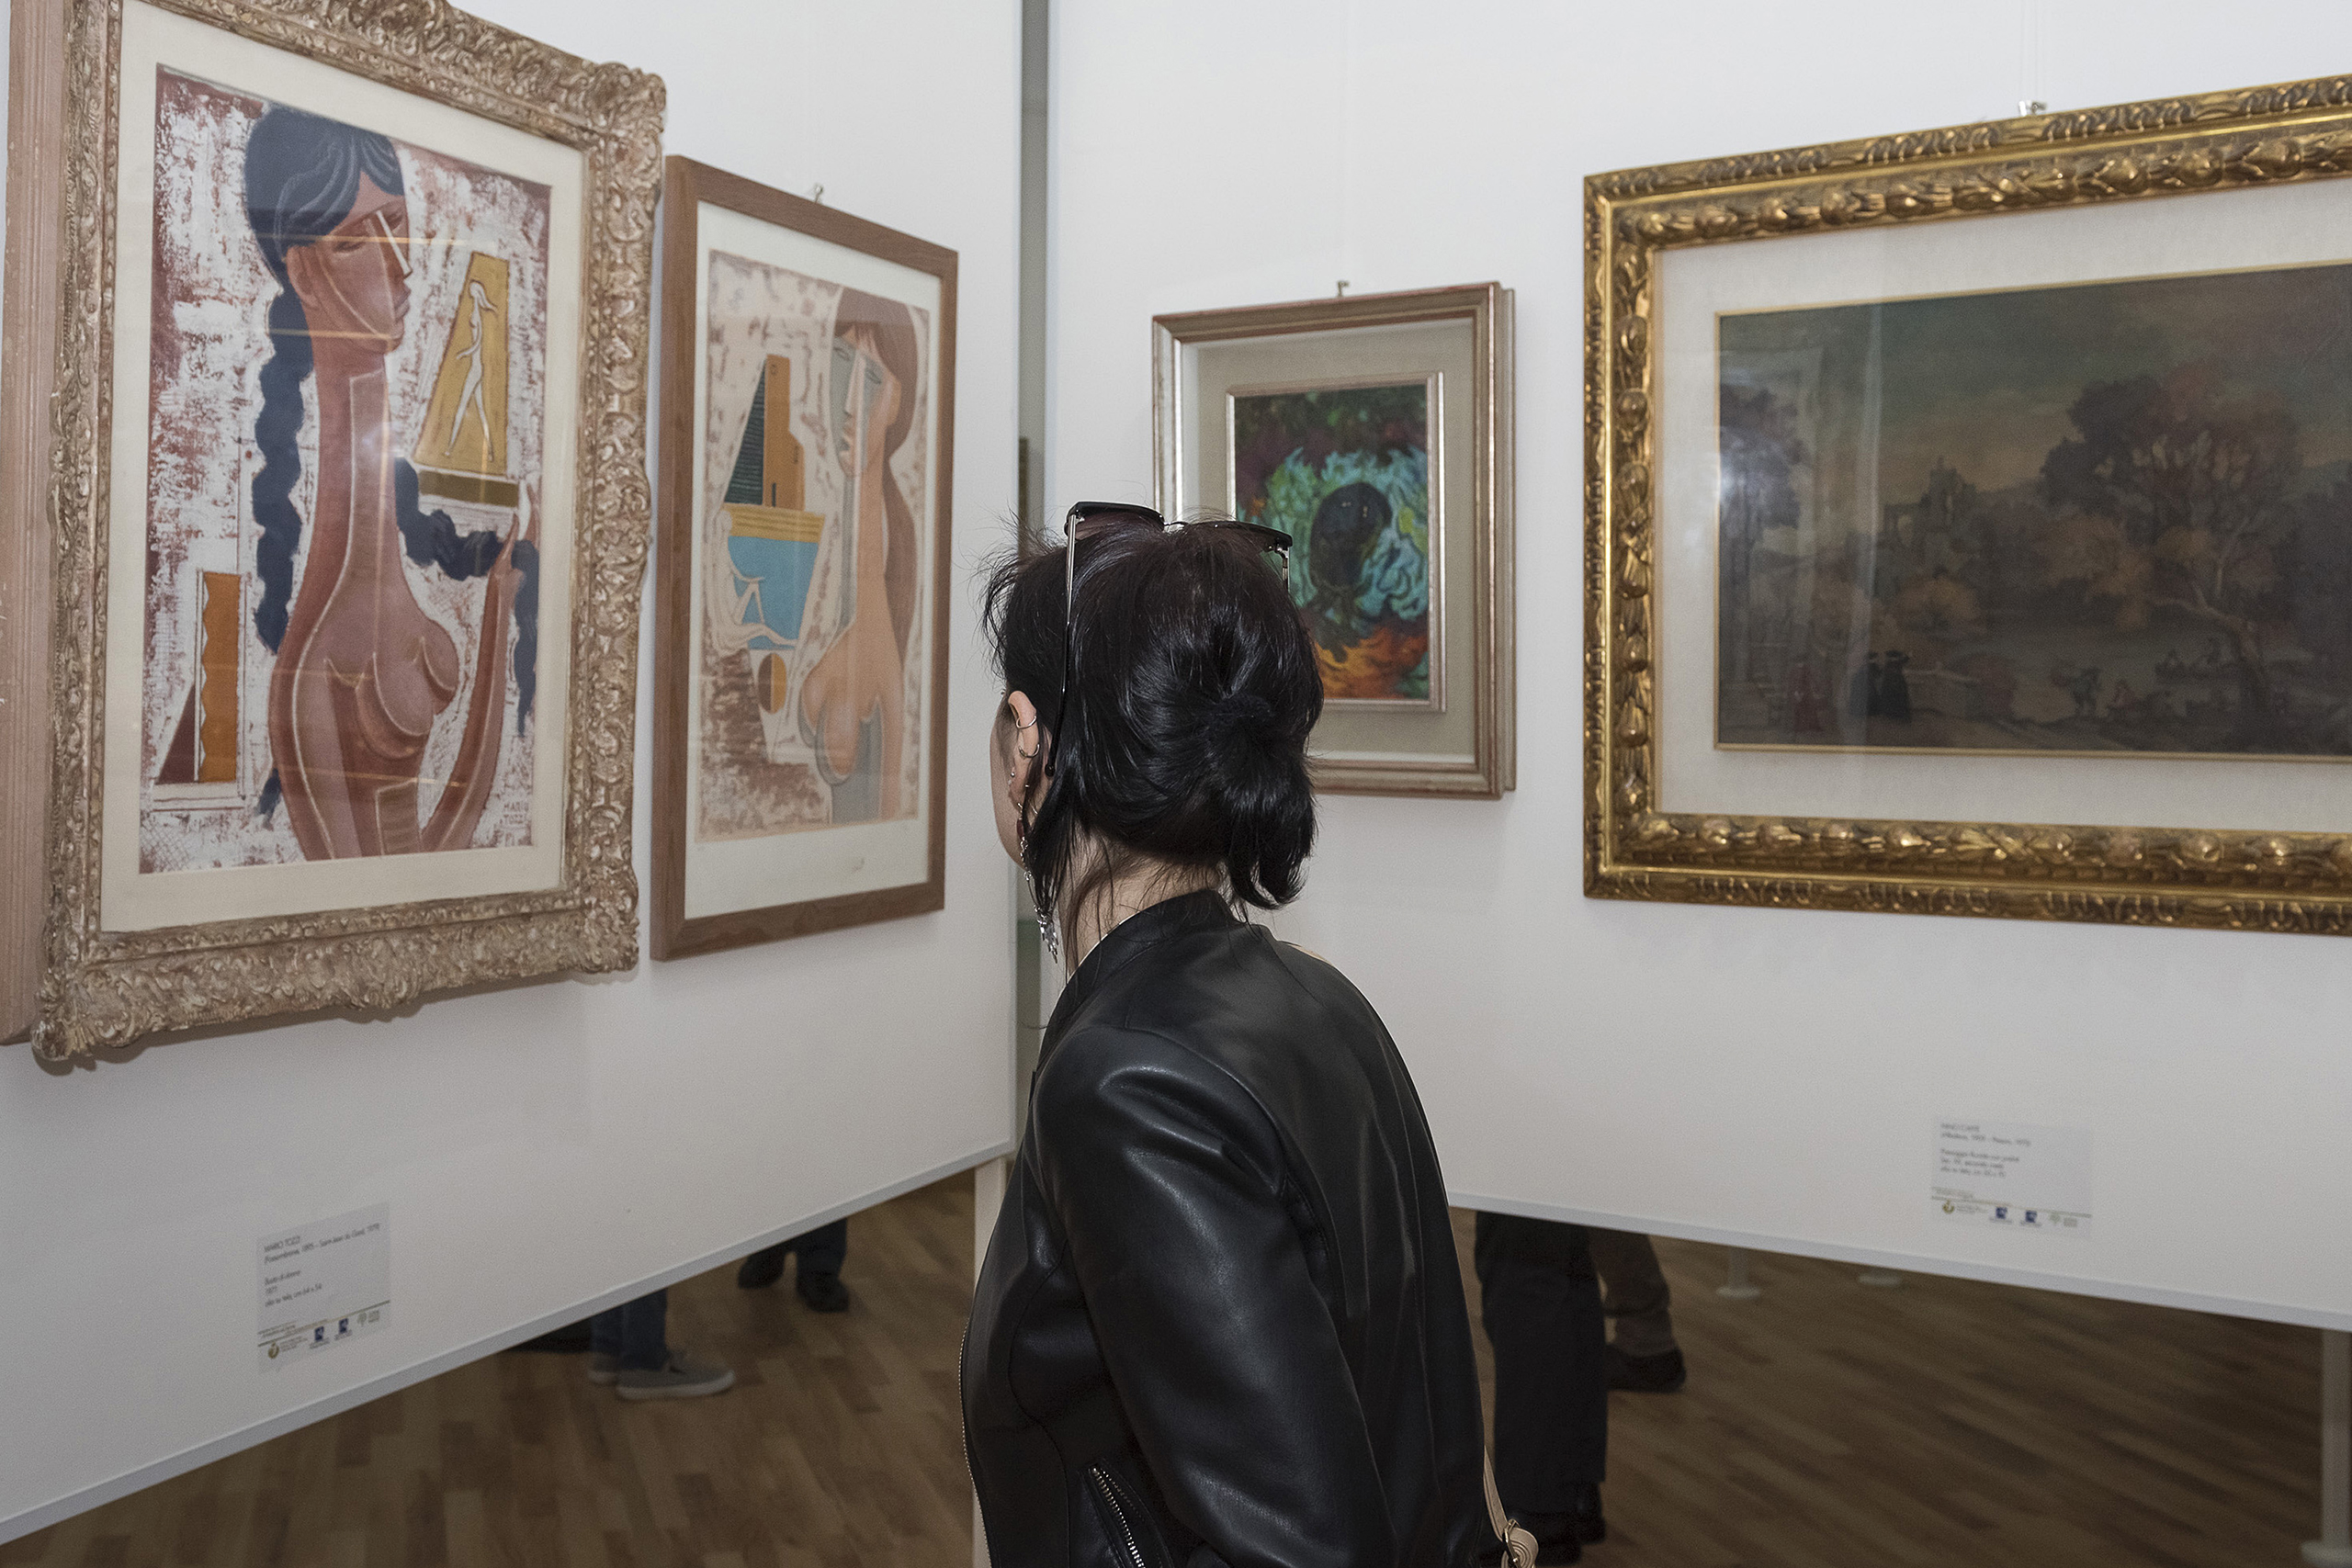 A visitor admires paintings during the "Victory of the State" exhibition in Reggio Calabria, Italy, on May 7, 2016. The exhibition includes paintings that belonged to a boss of the 'Ndrangheta Calabrese mafia, notably two of Dali, and were confiscated by the court. (Enzo Penna—AFP/Getty Images)